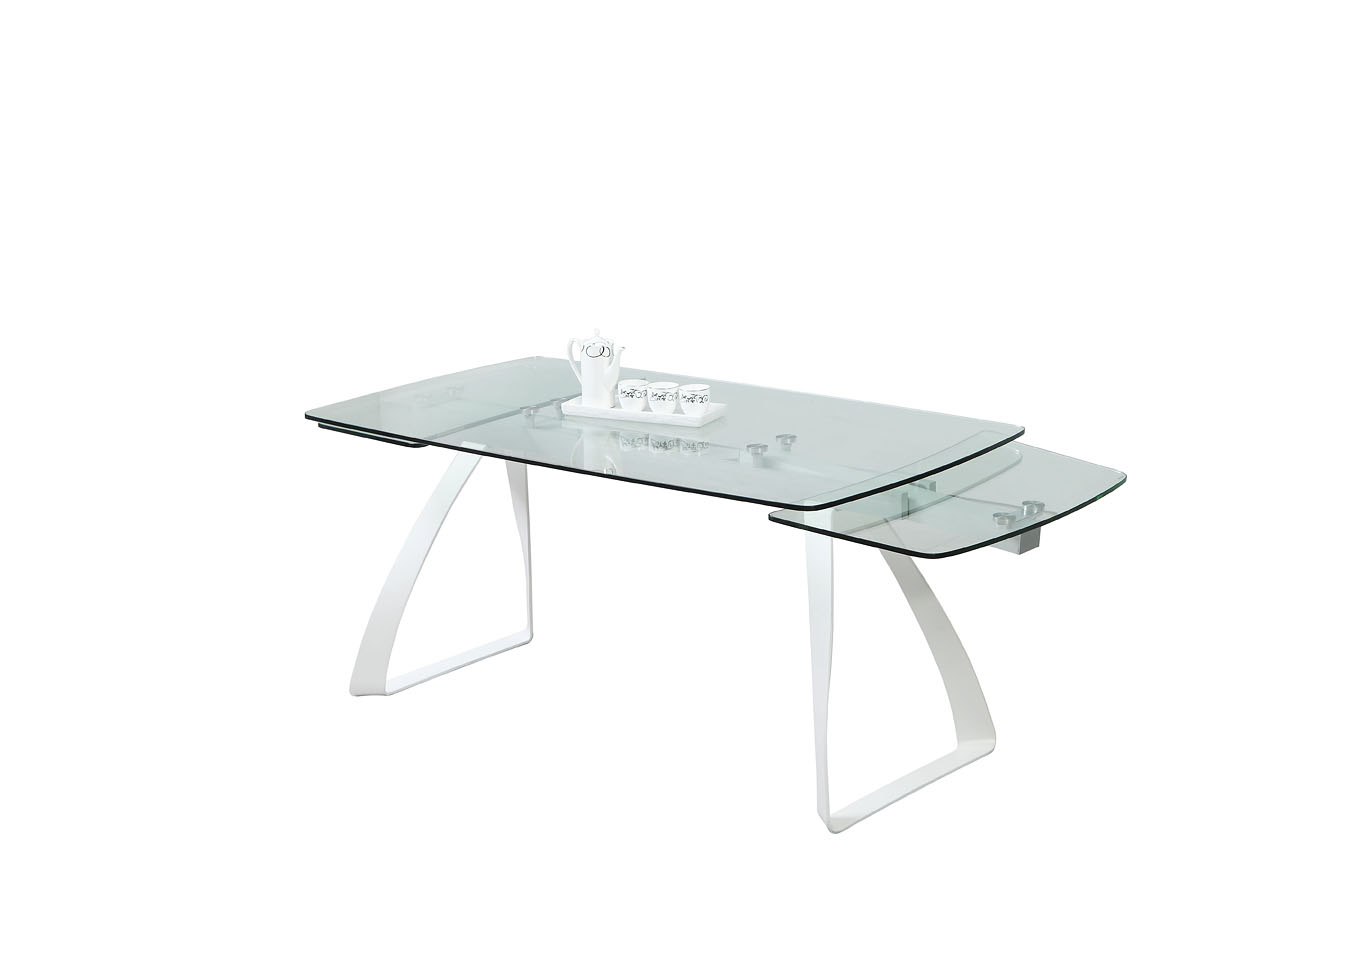 Chloe Matte White Rectangular Glass Top Dining Table,Chintaly Imports